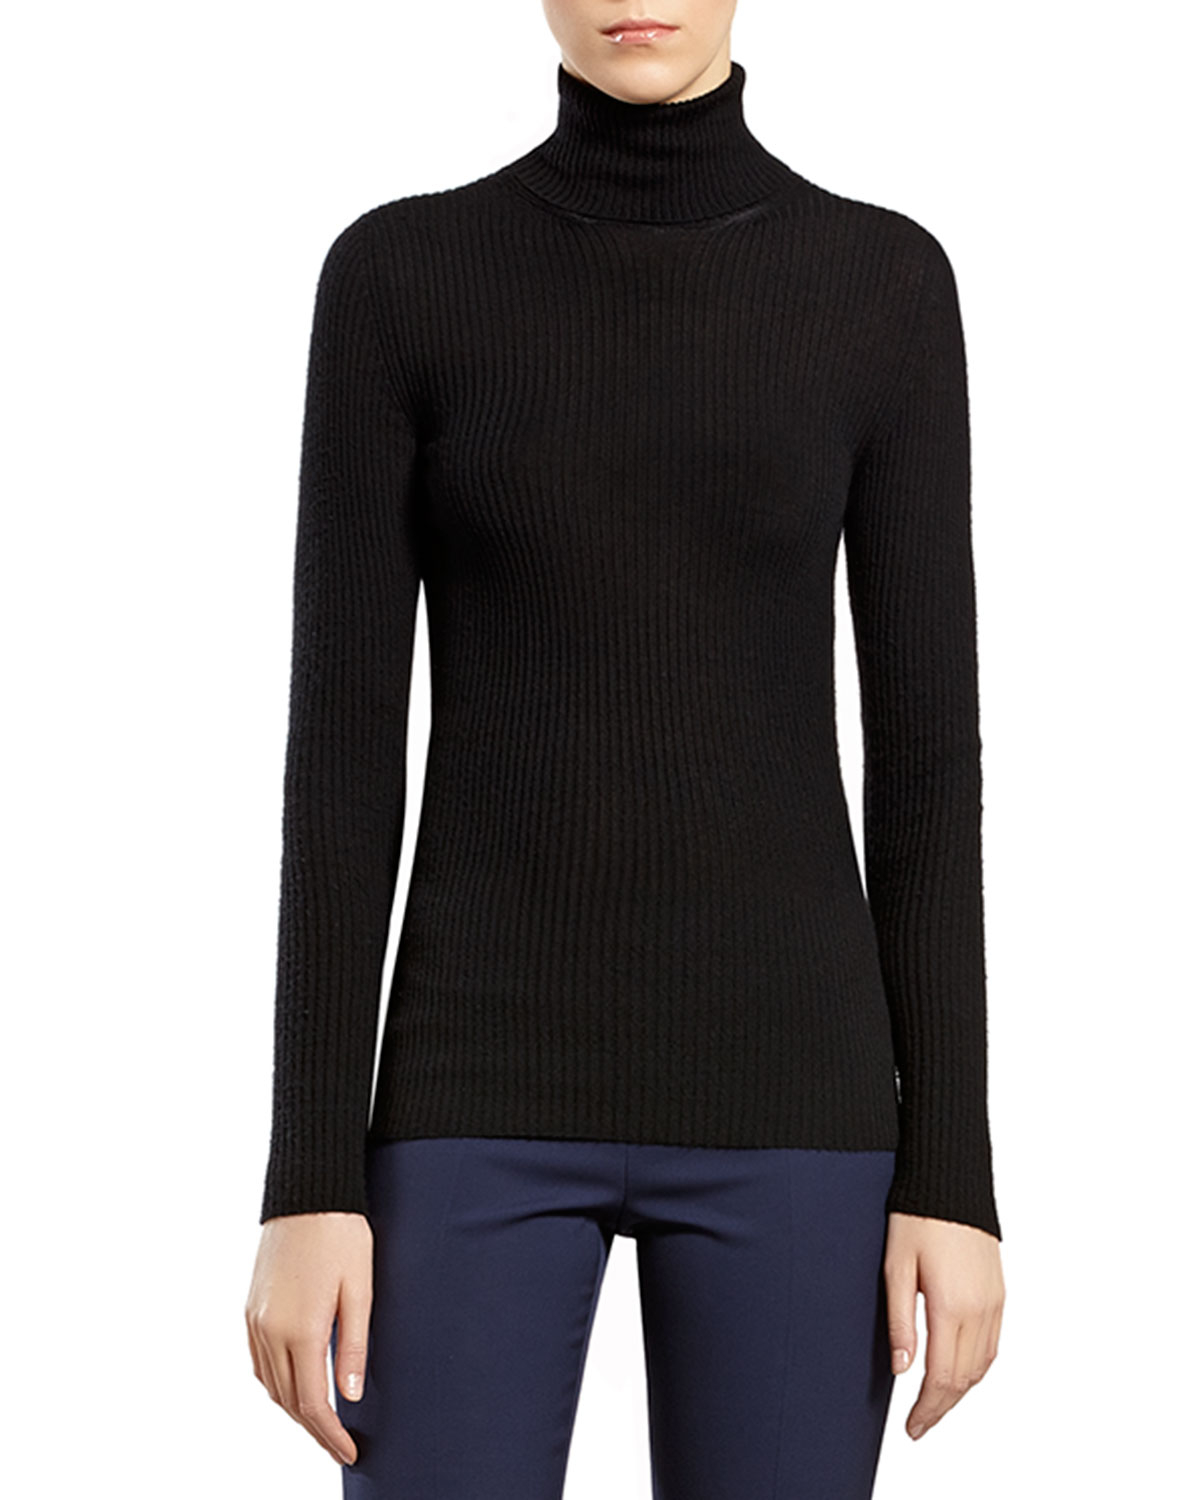 Gucci Black Cashmere Ribbed Cashmere Turtleneck Sweater in Black | Lyst